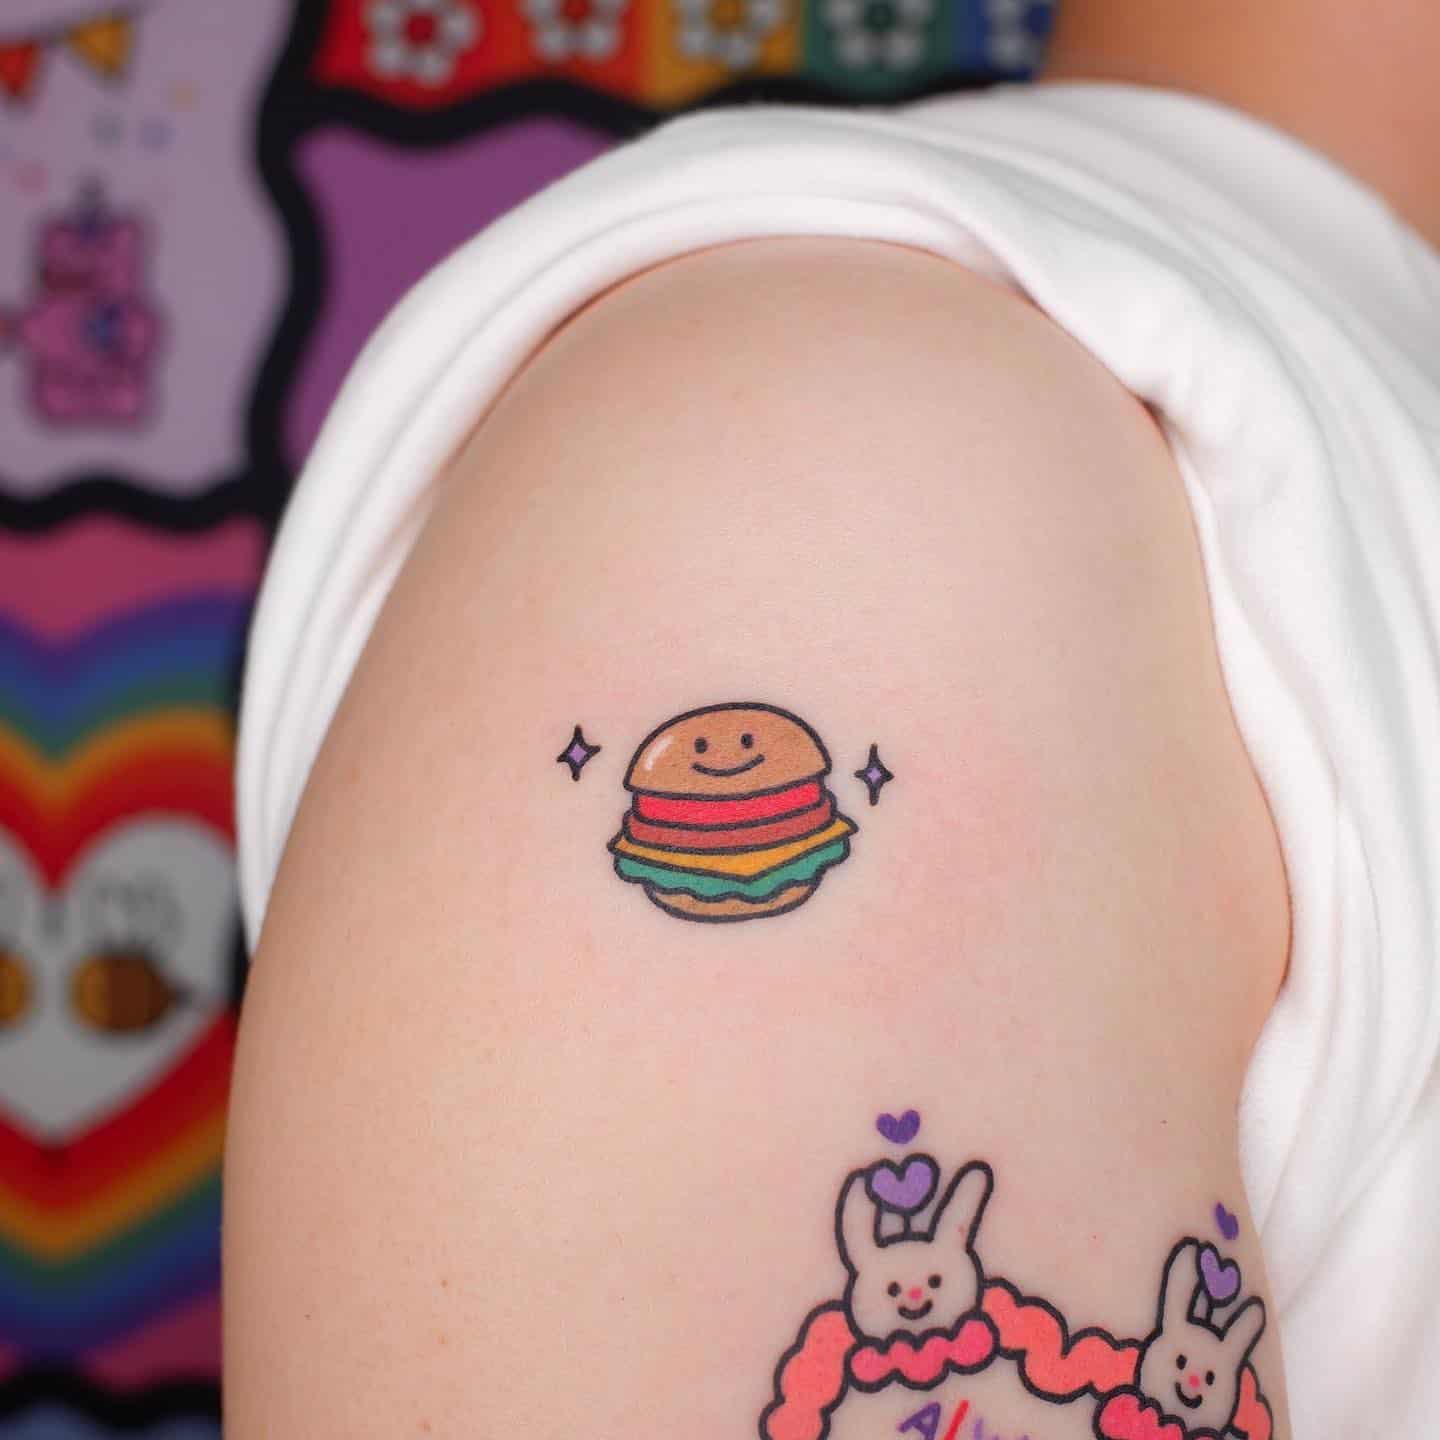 Burger tattoo designs by